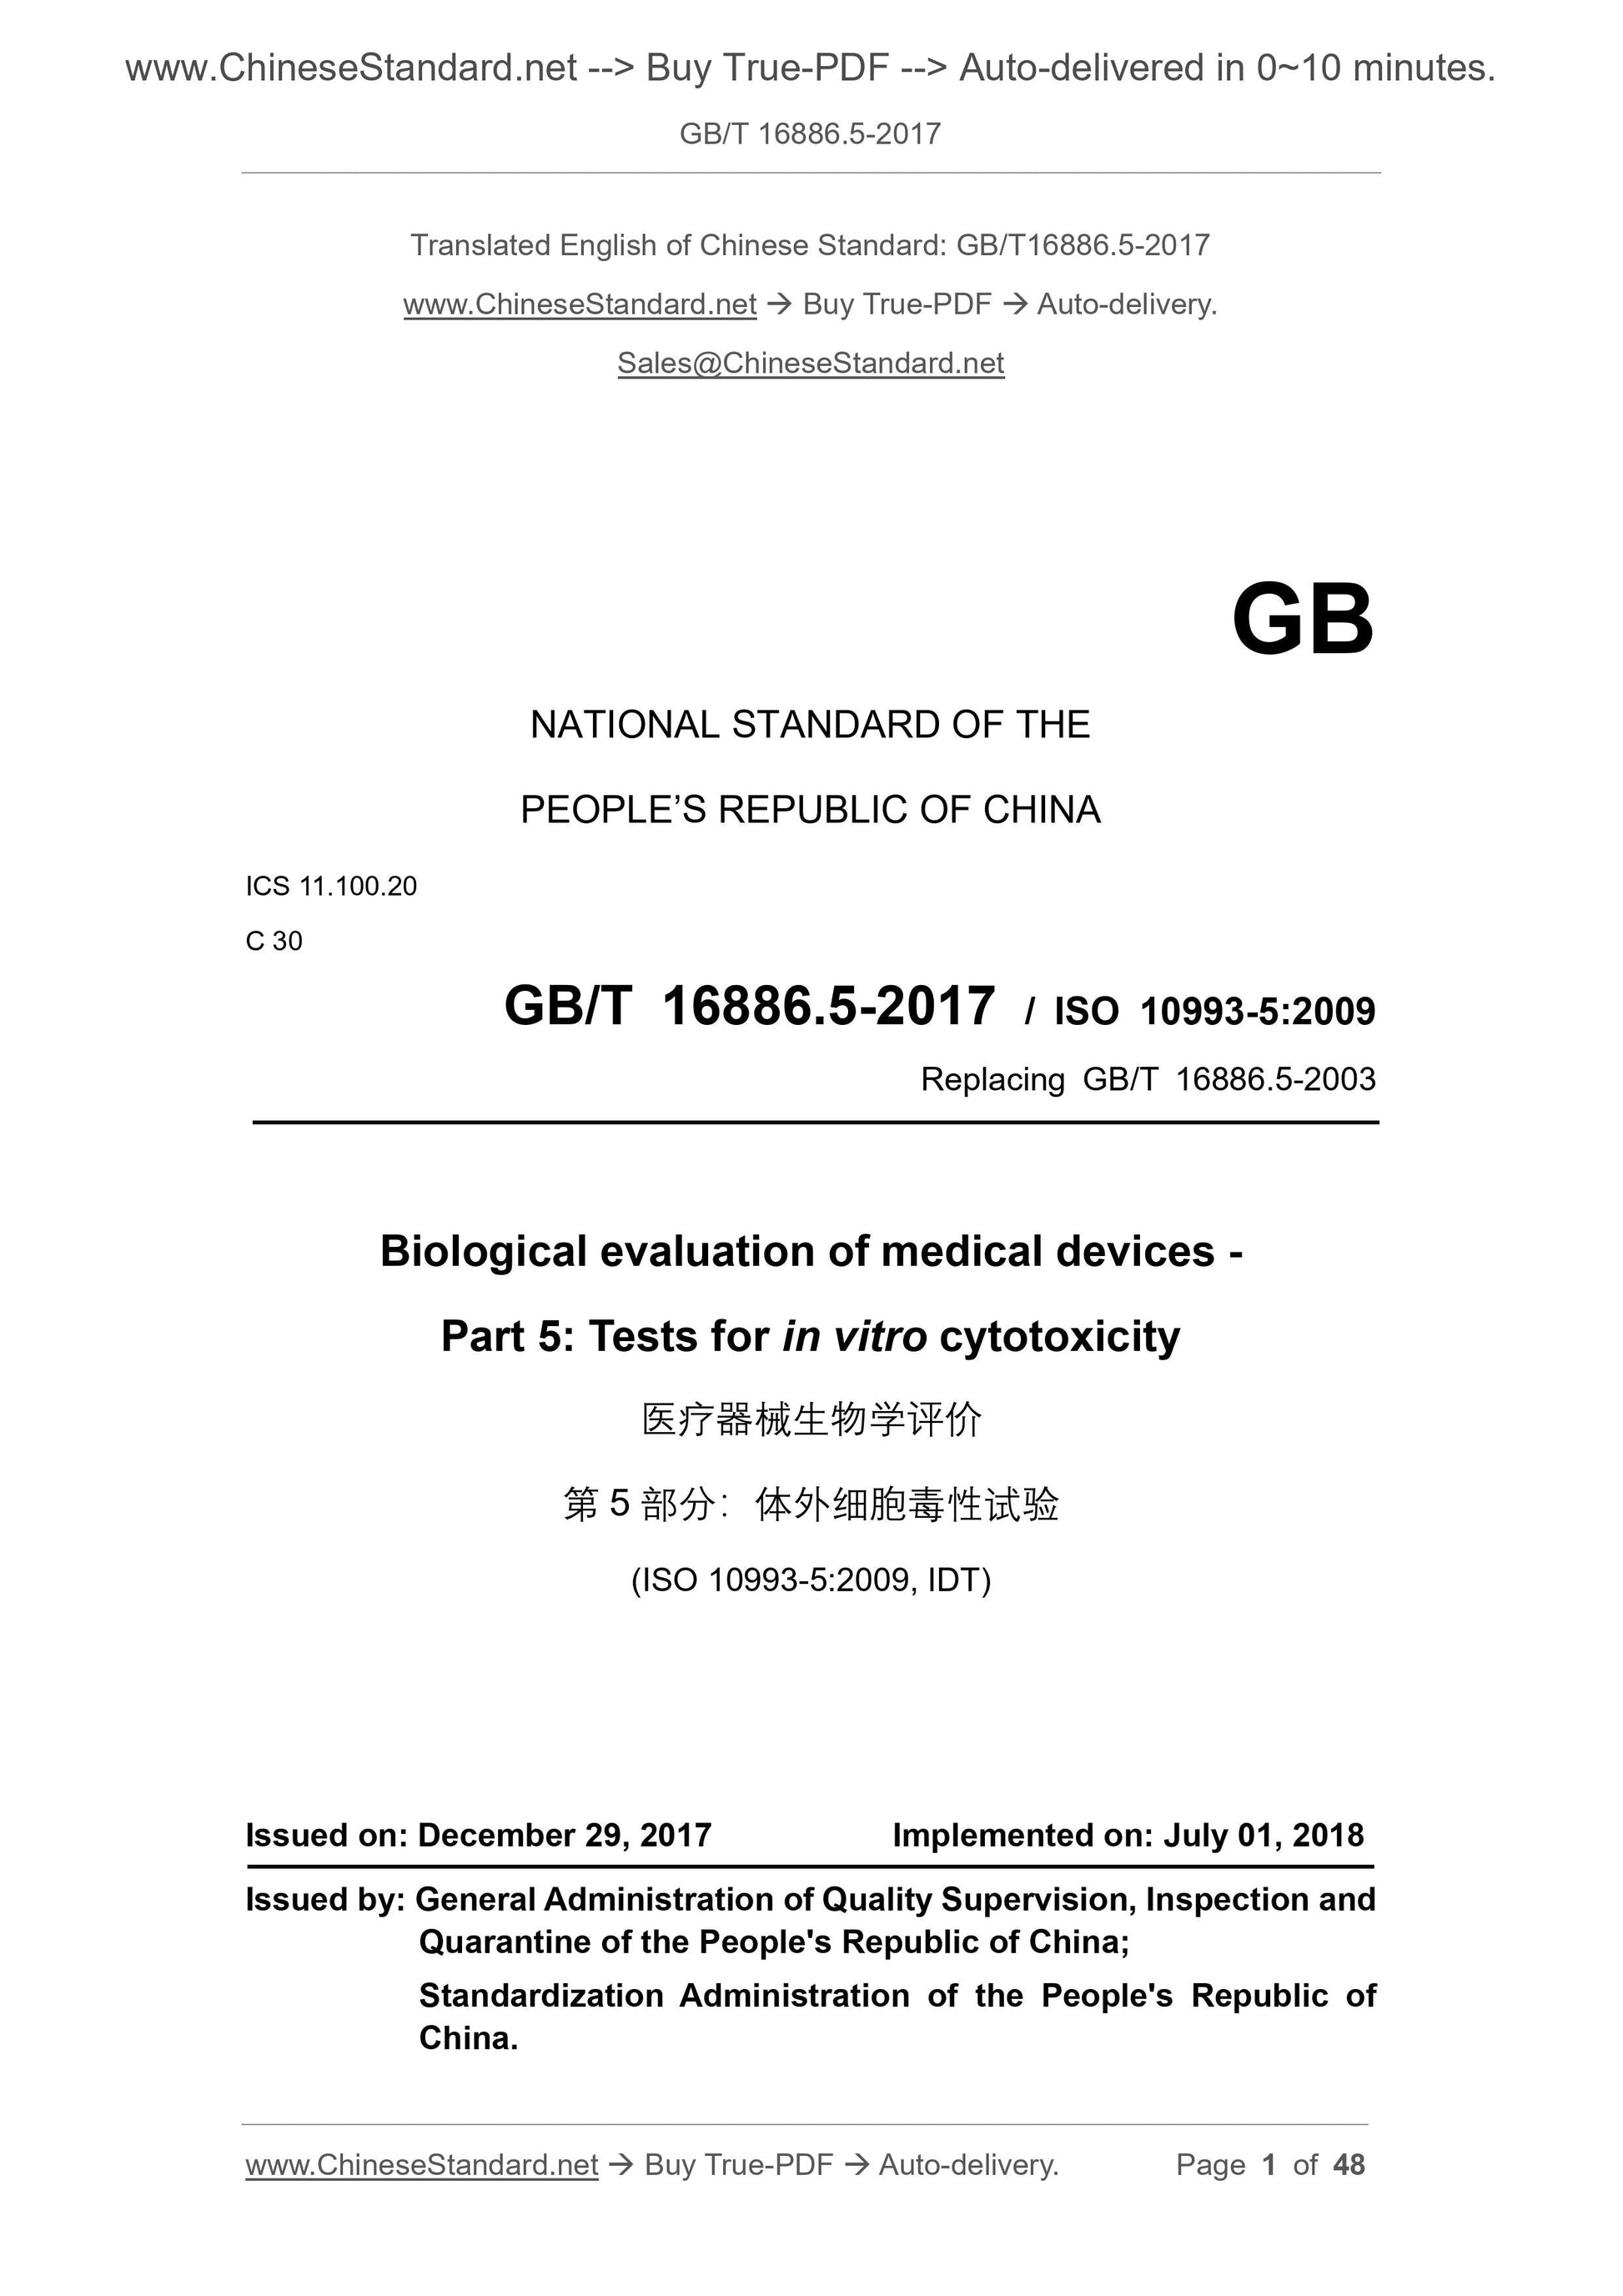 GB/T 16886.5-2017 Page 1